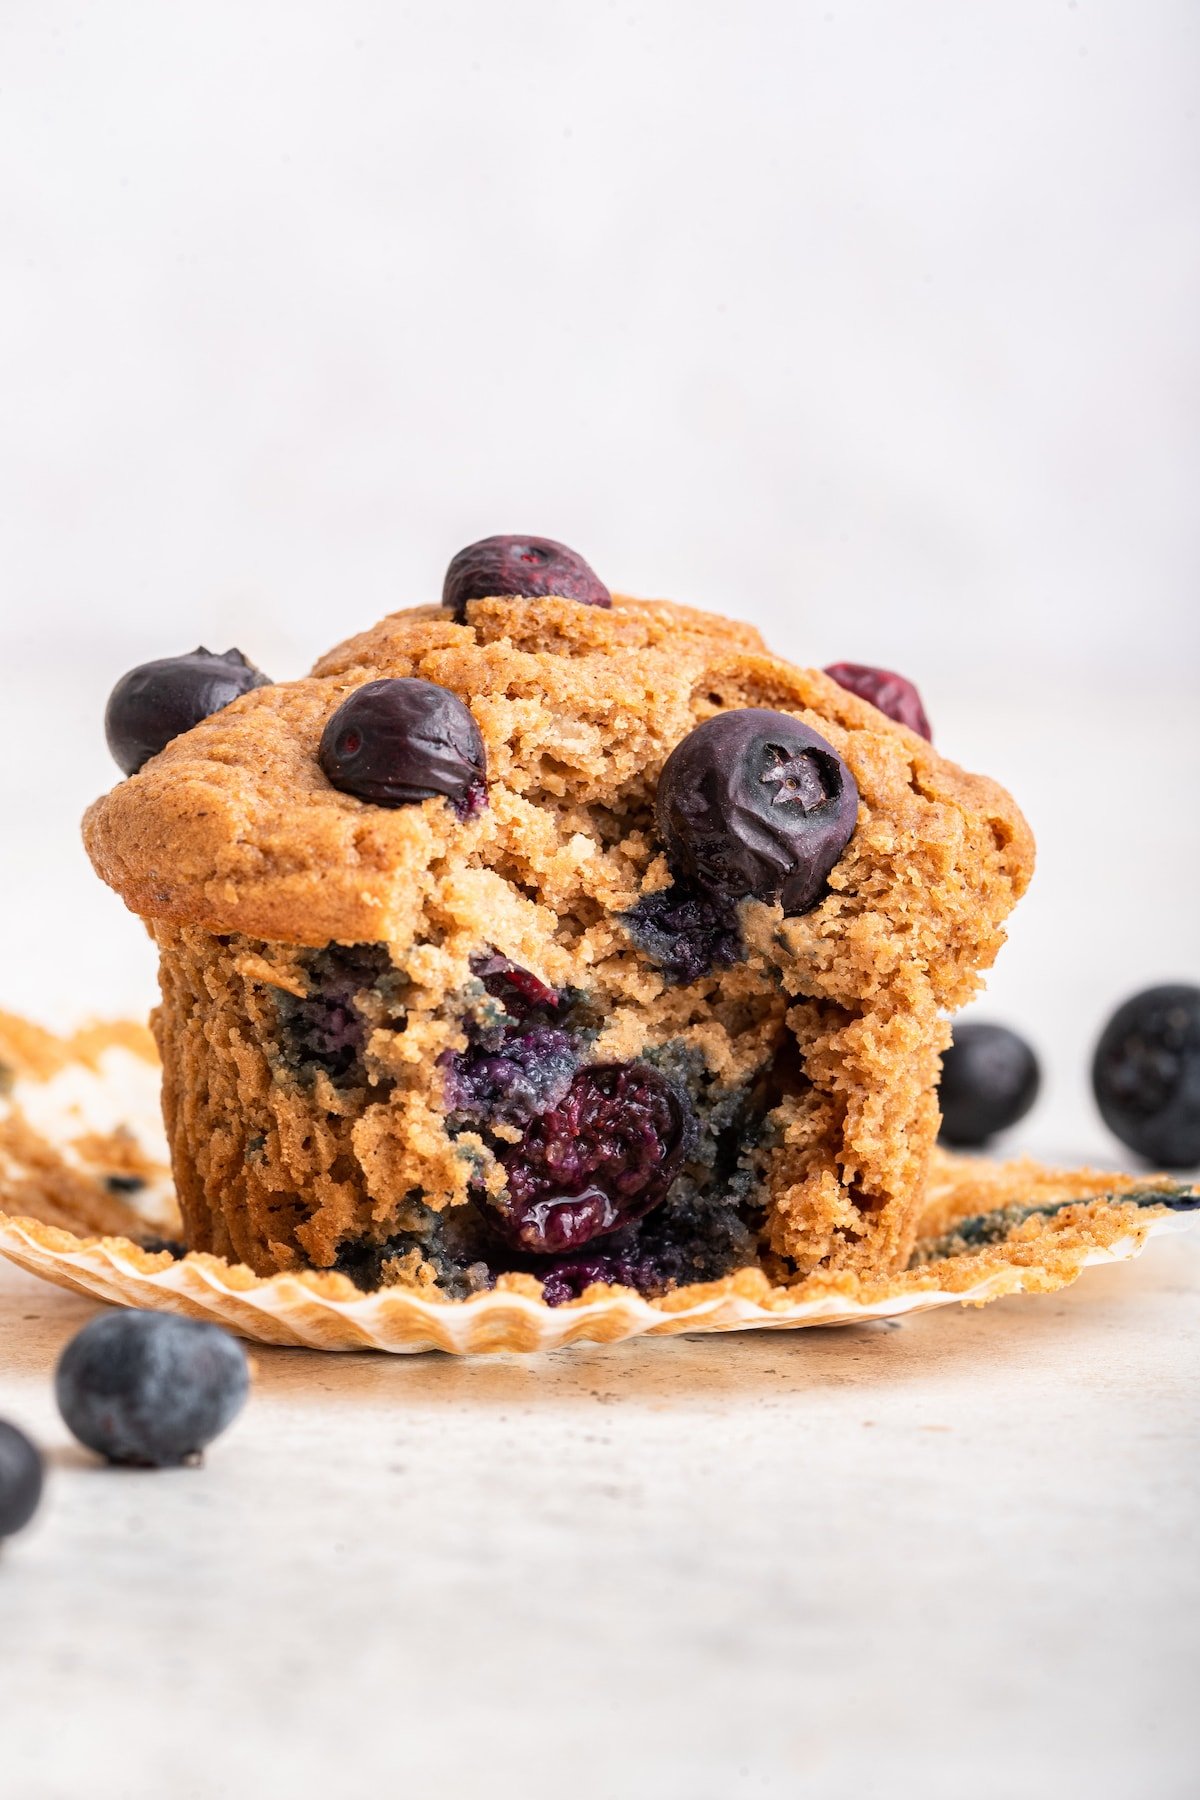 A blueberry protein muffin with a bite taken from it.